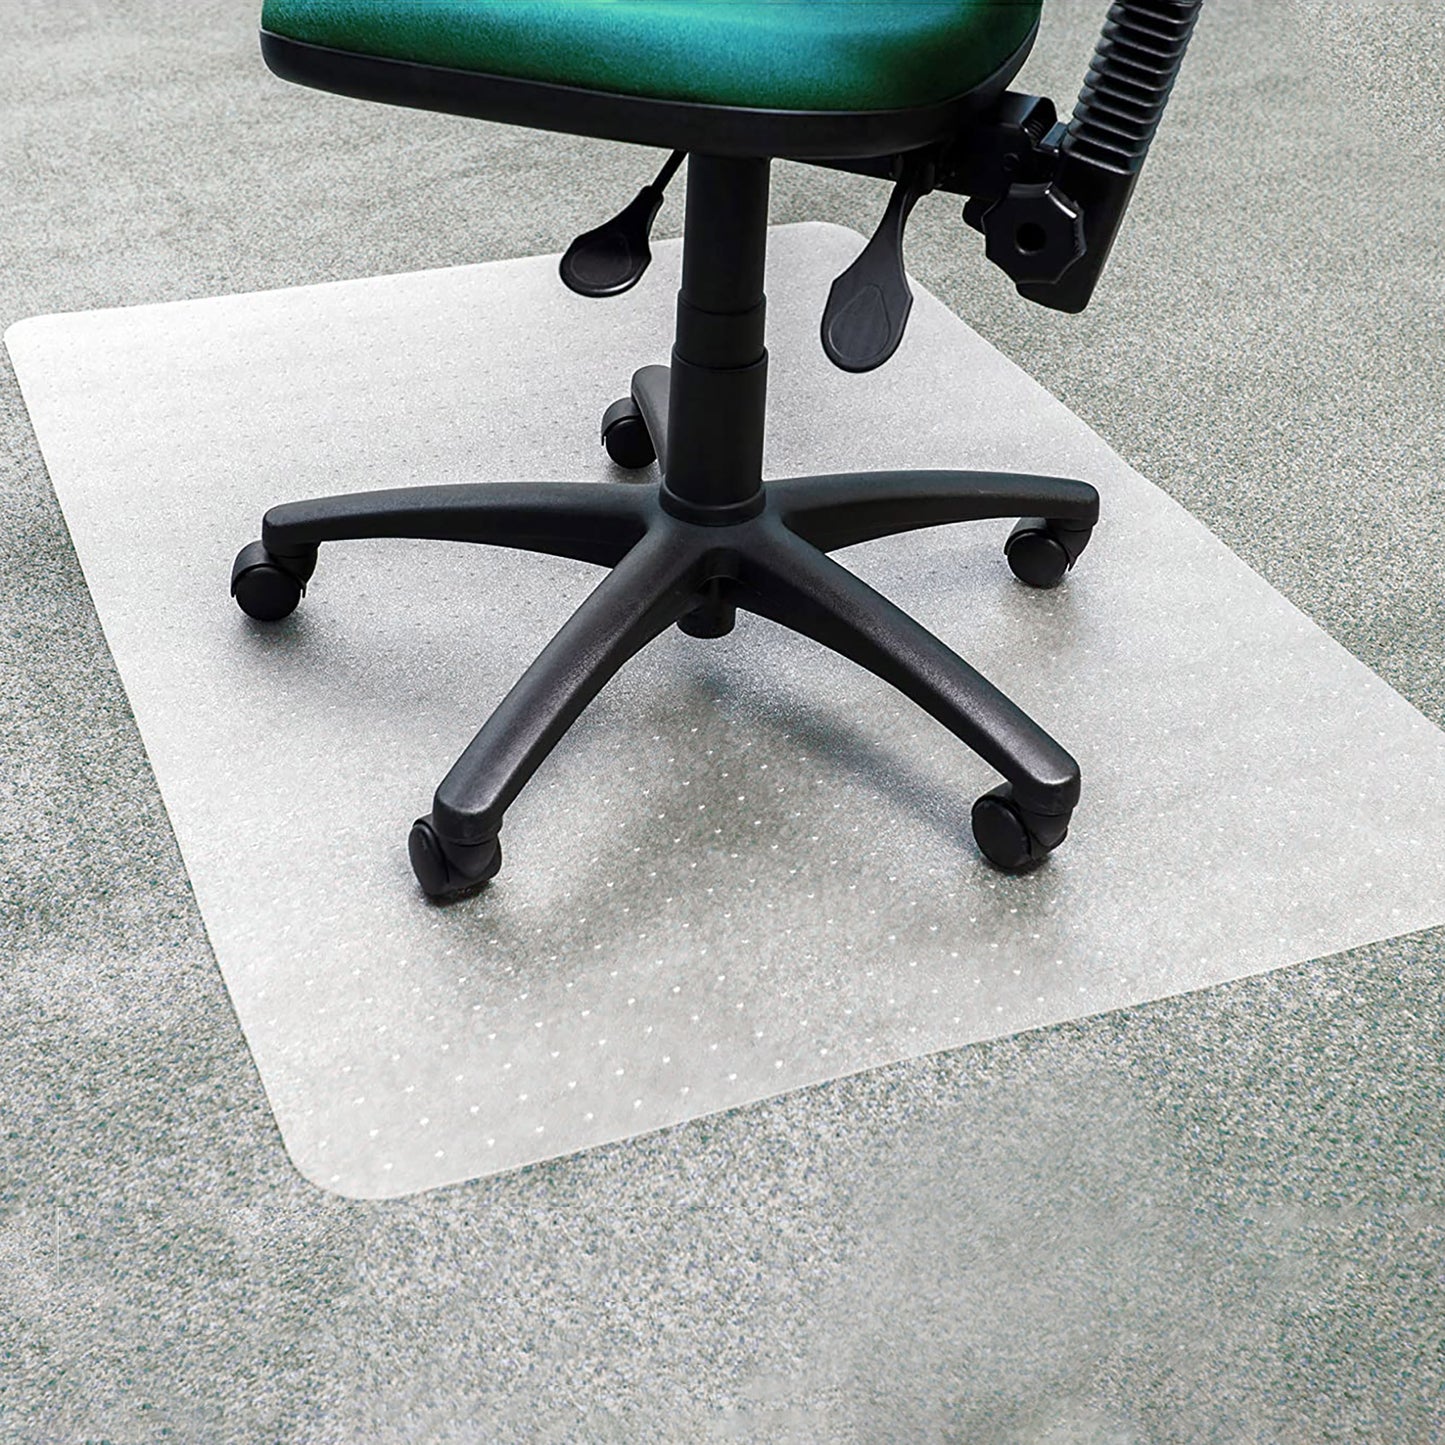 PVC Office Floor Protector - Unrolled Chair Mat Suitable for Low Pile Carpet Floors - Non Slip - 90cm x 120cm - UK Made